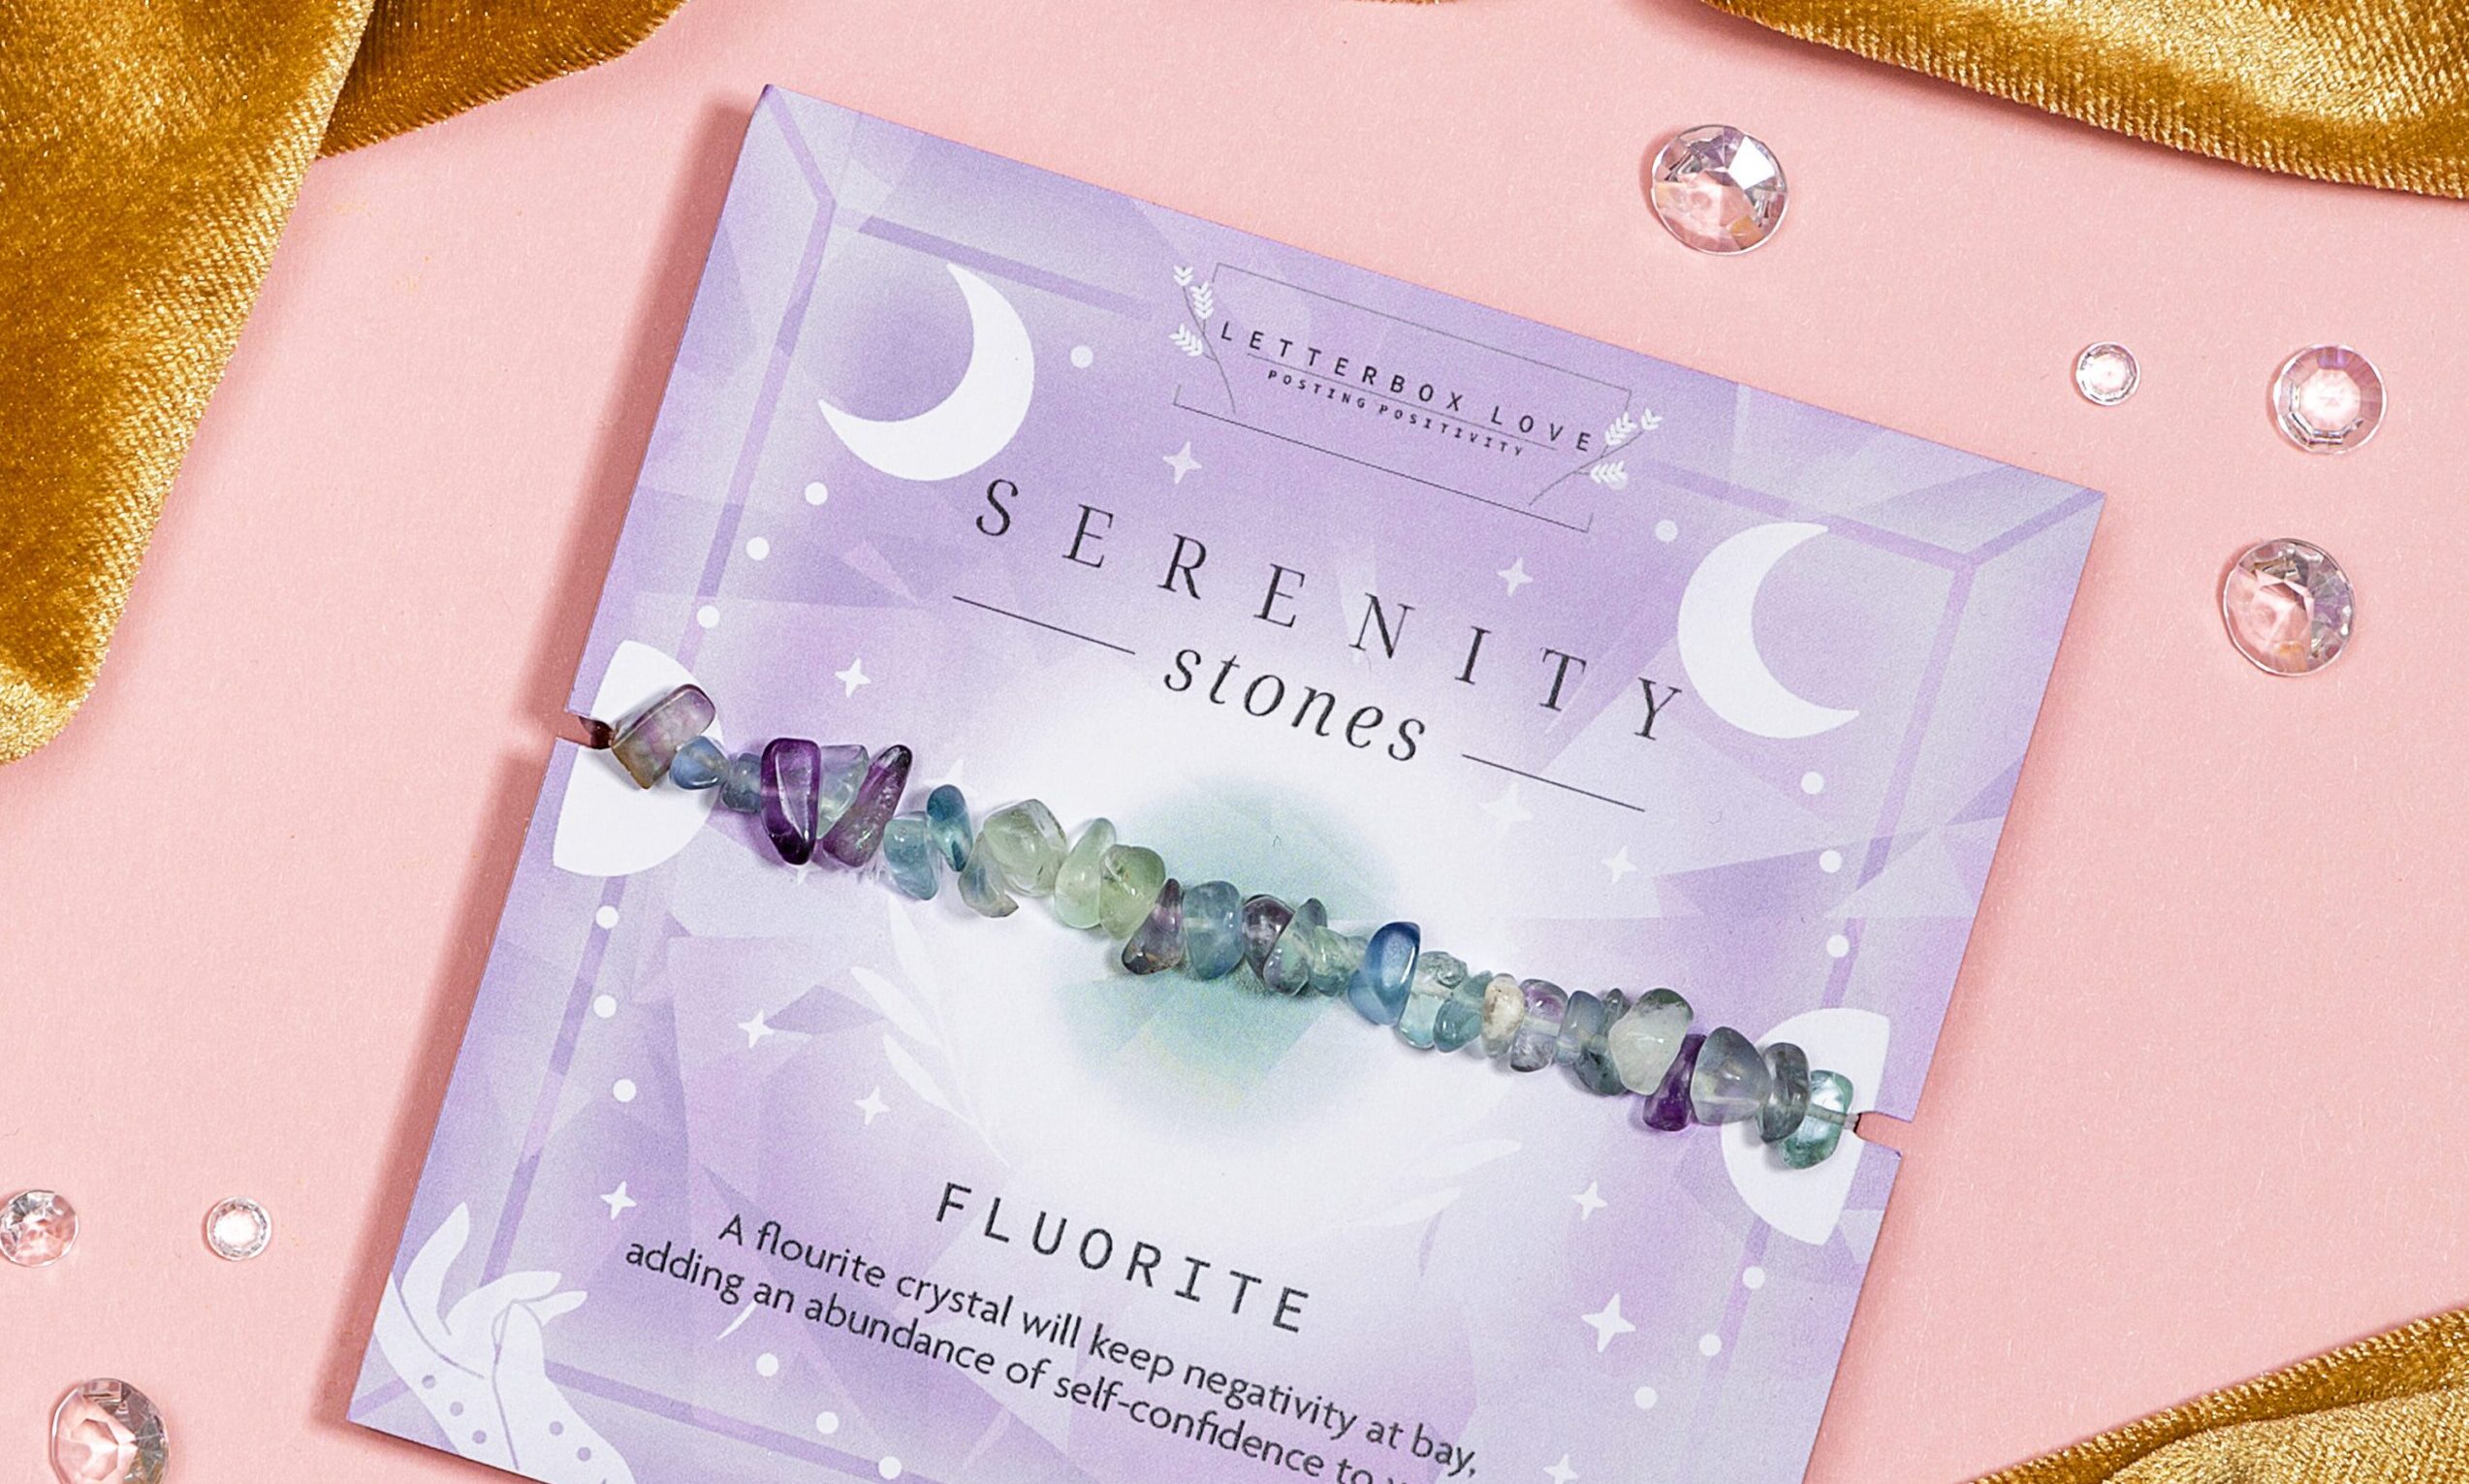 Letterbox Love launches new Serenity Stones assortment